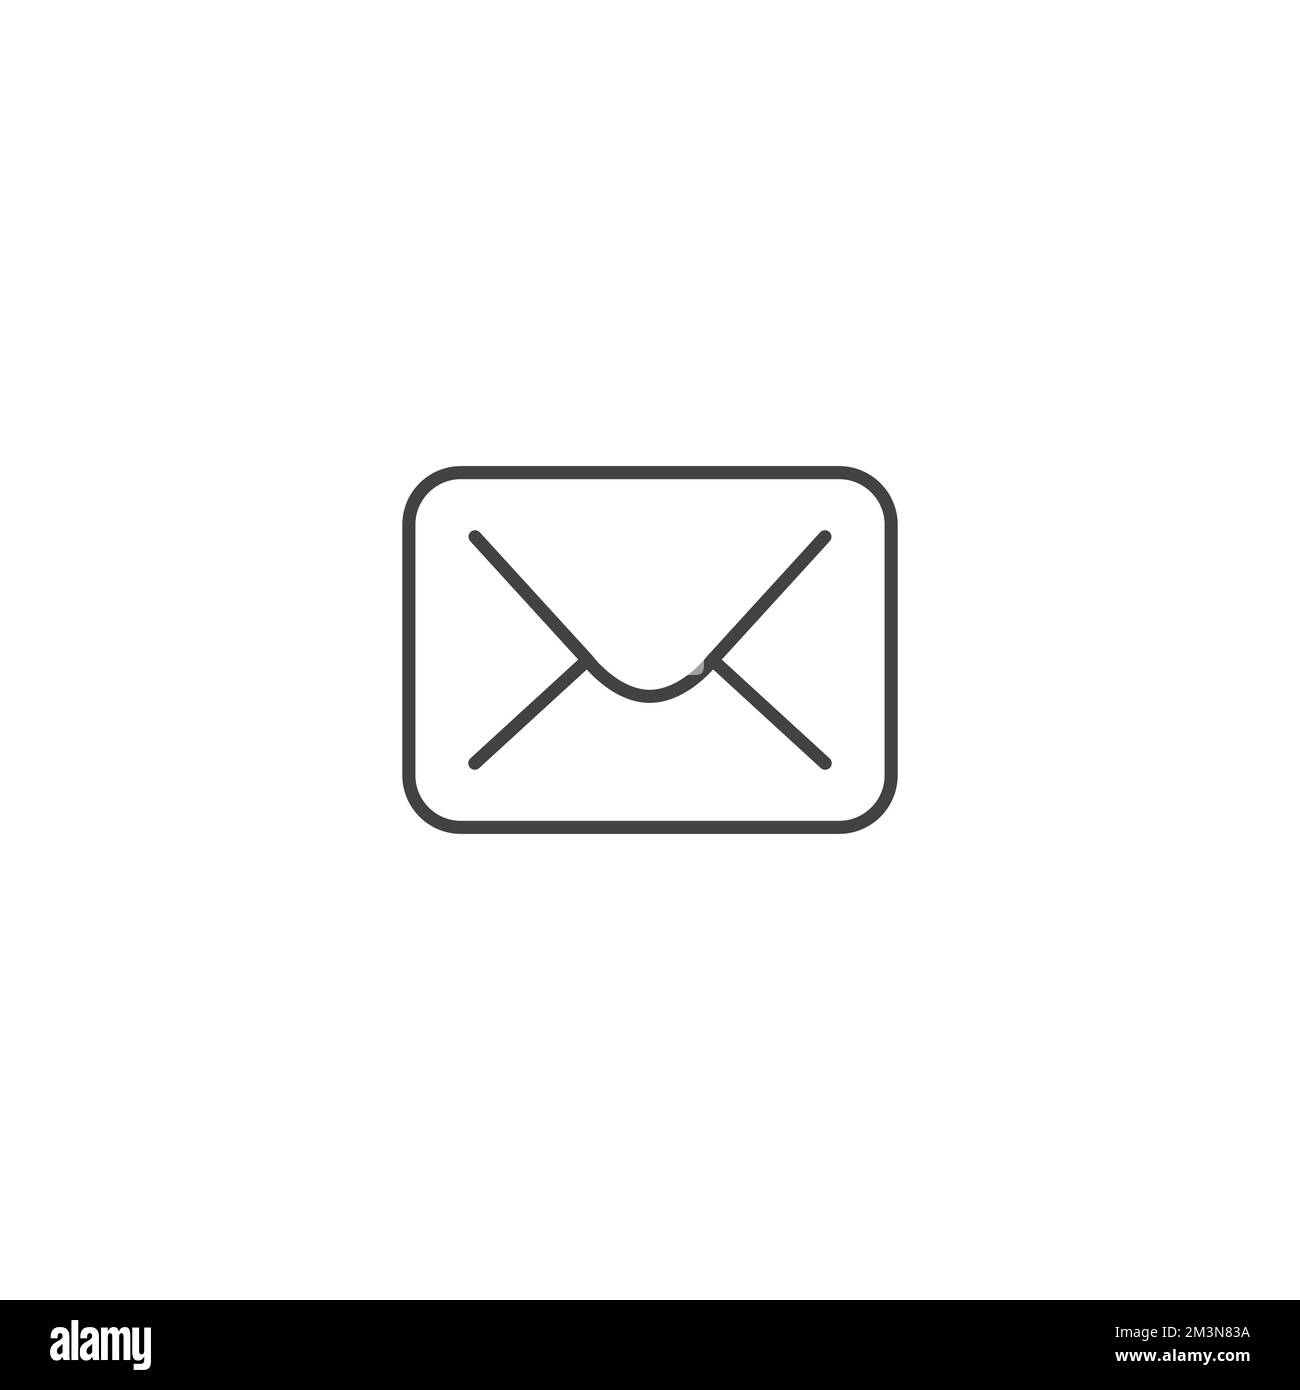 Mail line icon. Email address sign for business card or web design. Vector element isolated on white Stock Vector